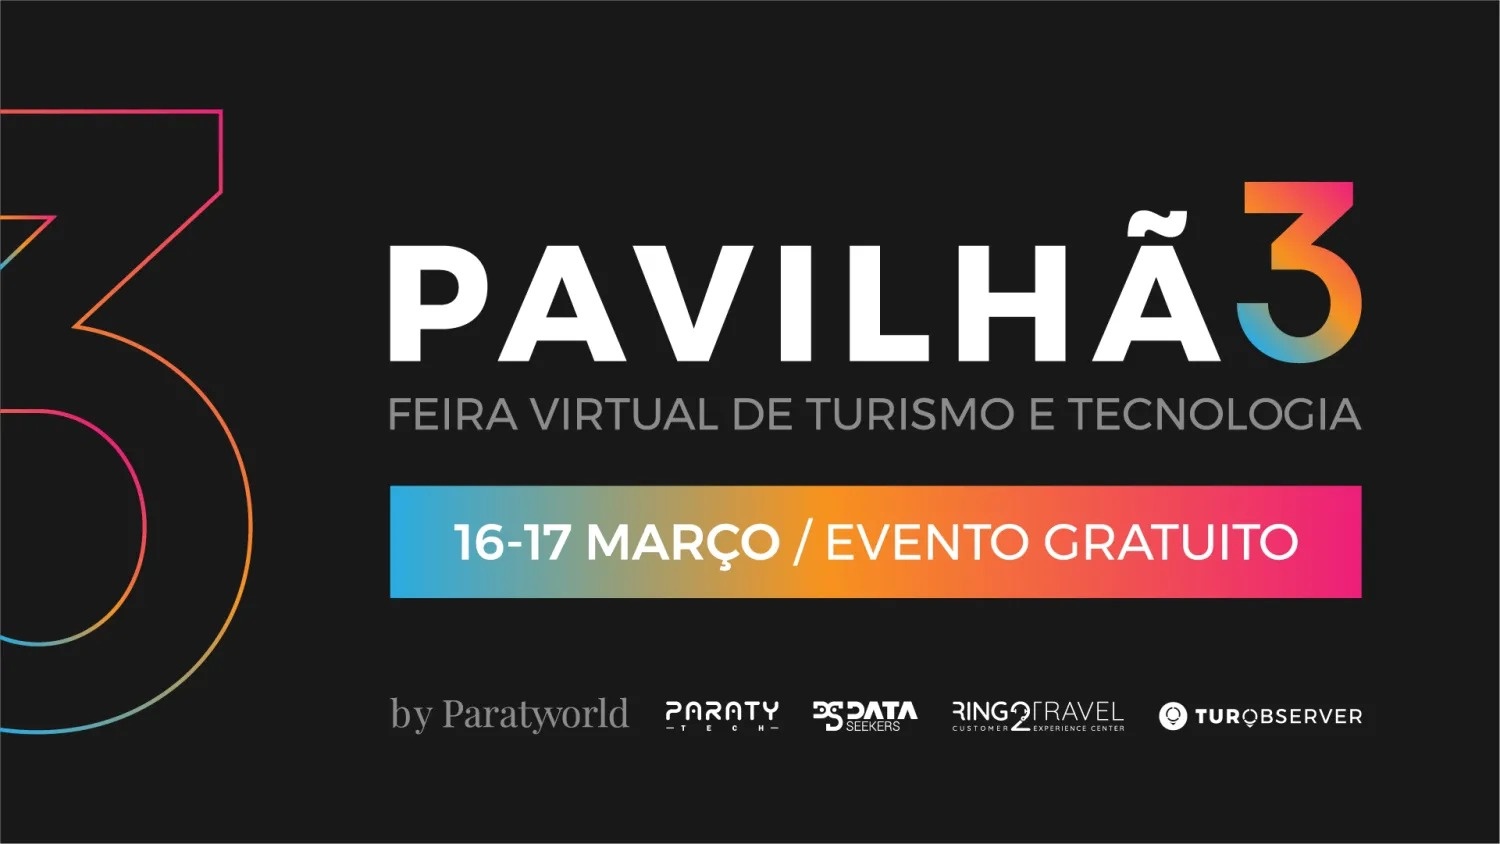 From the creators of Pavilhão 8, from March 16 to 17 comes Pavilhão 3. Save the date!